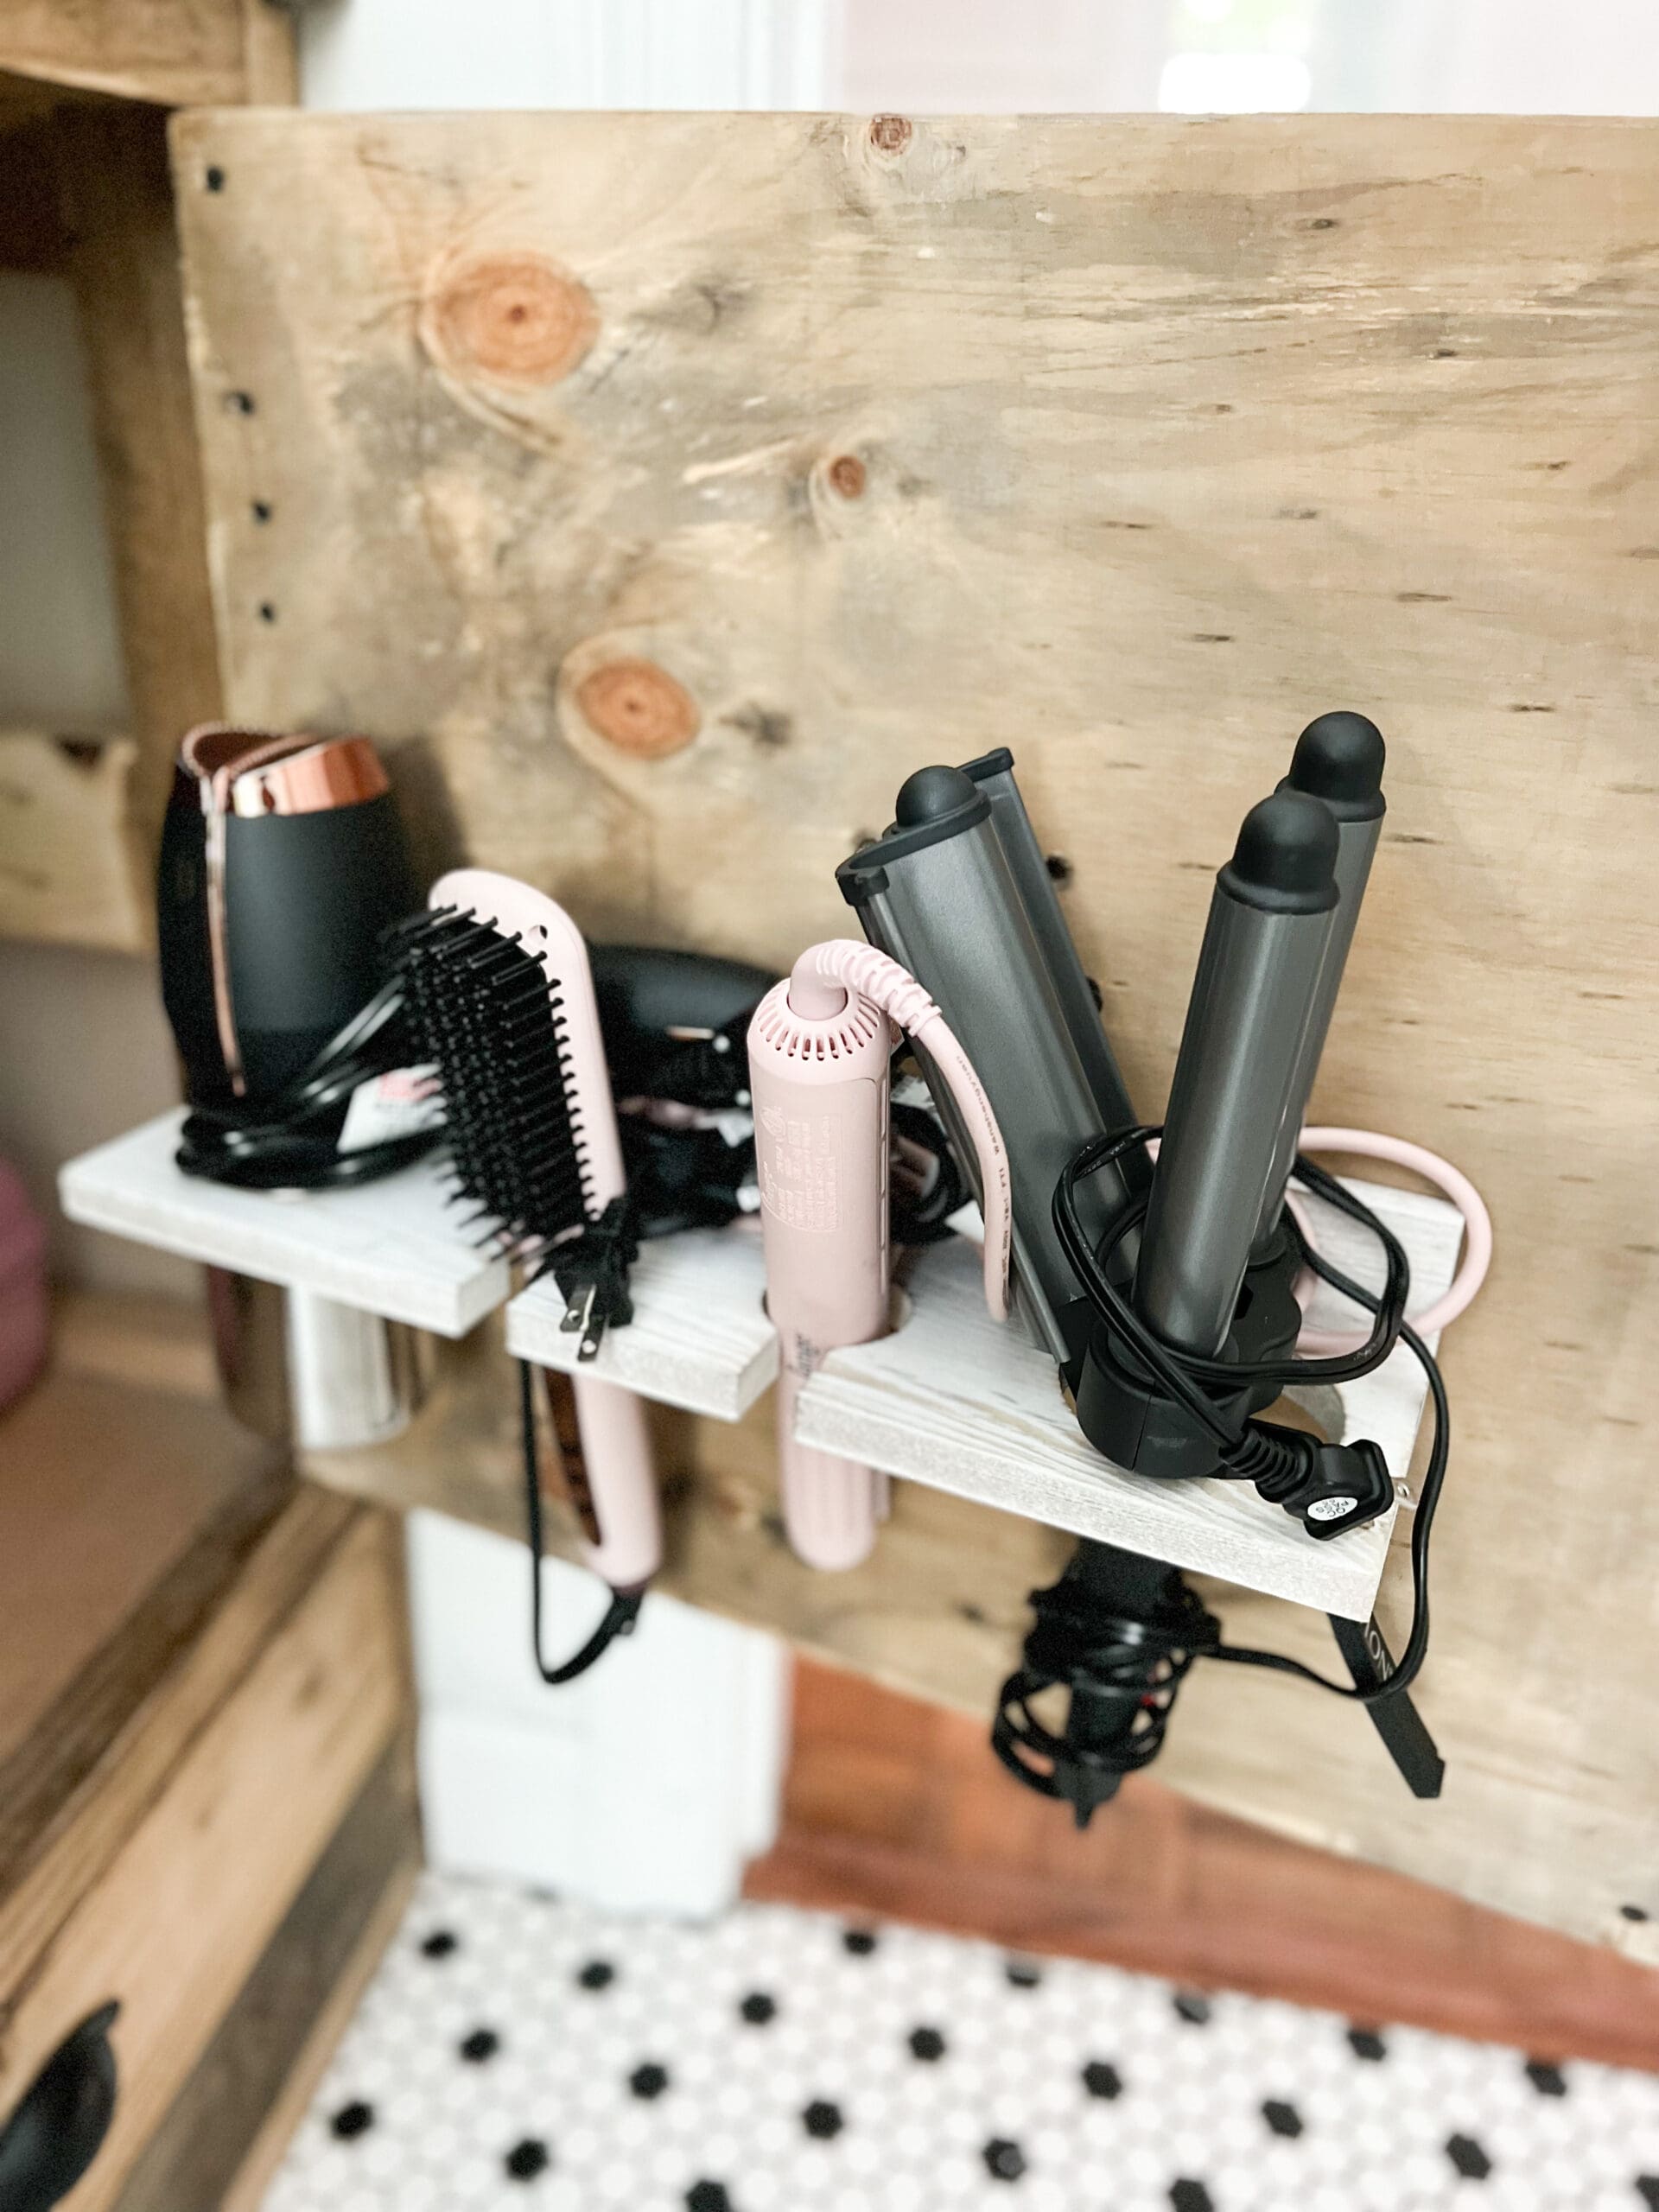 With one cabinet door open, wood organizer is screwed to the backside of the door holding brushes, curlers, & blow dryers out of harm's way.